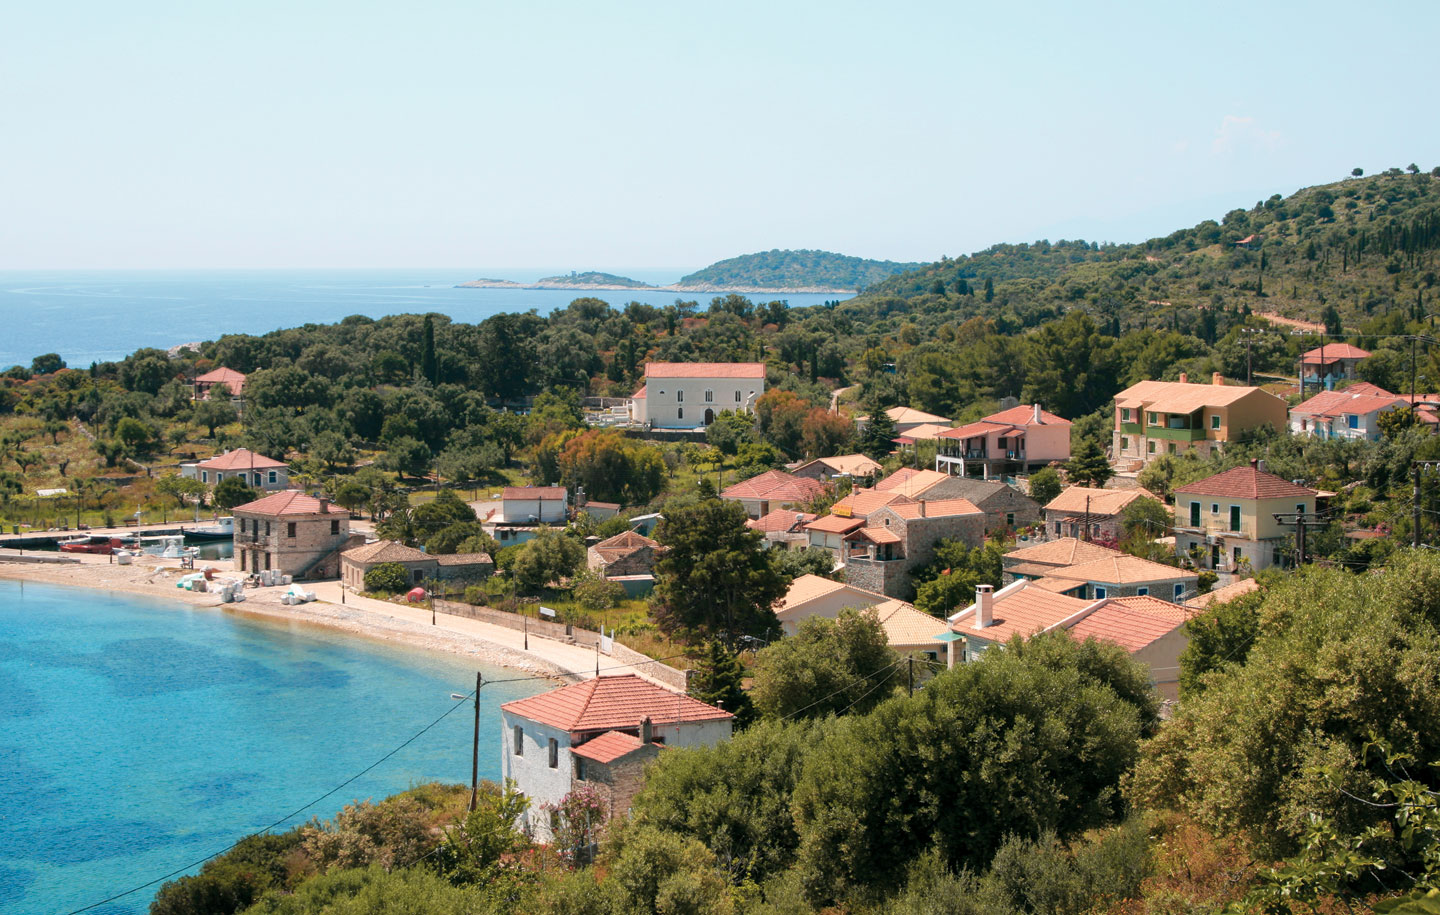 Kastos island | Low hills and lacy shores | Lefkada's small islands